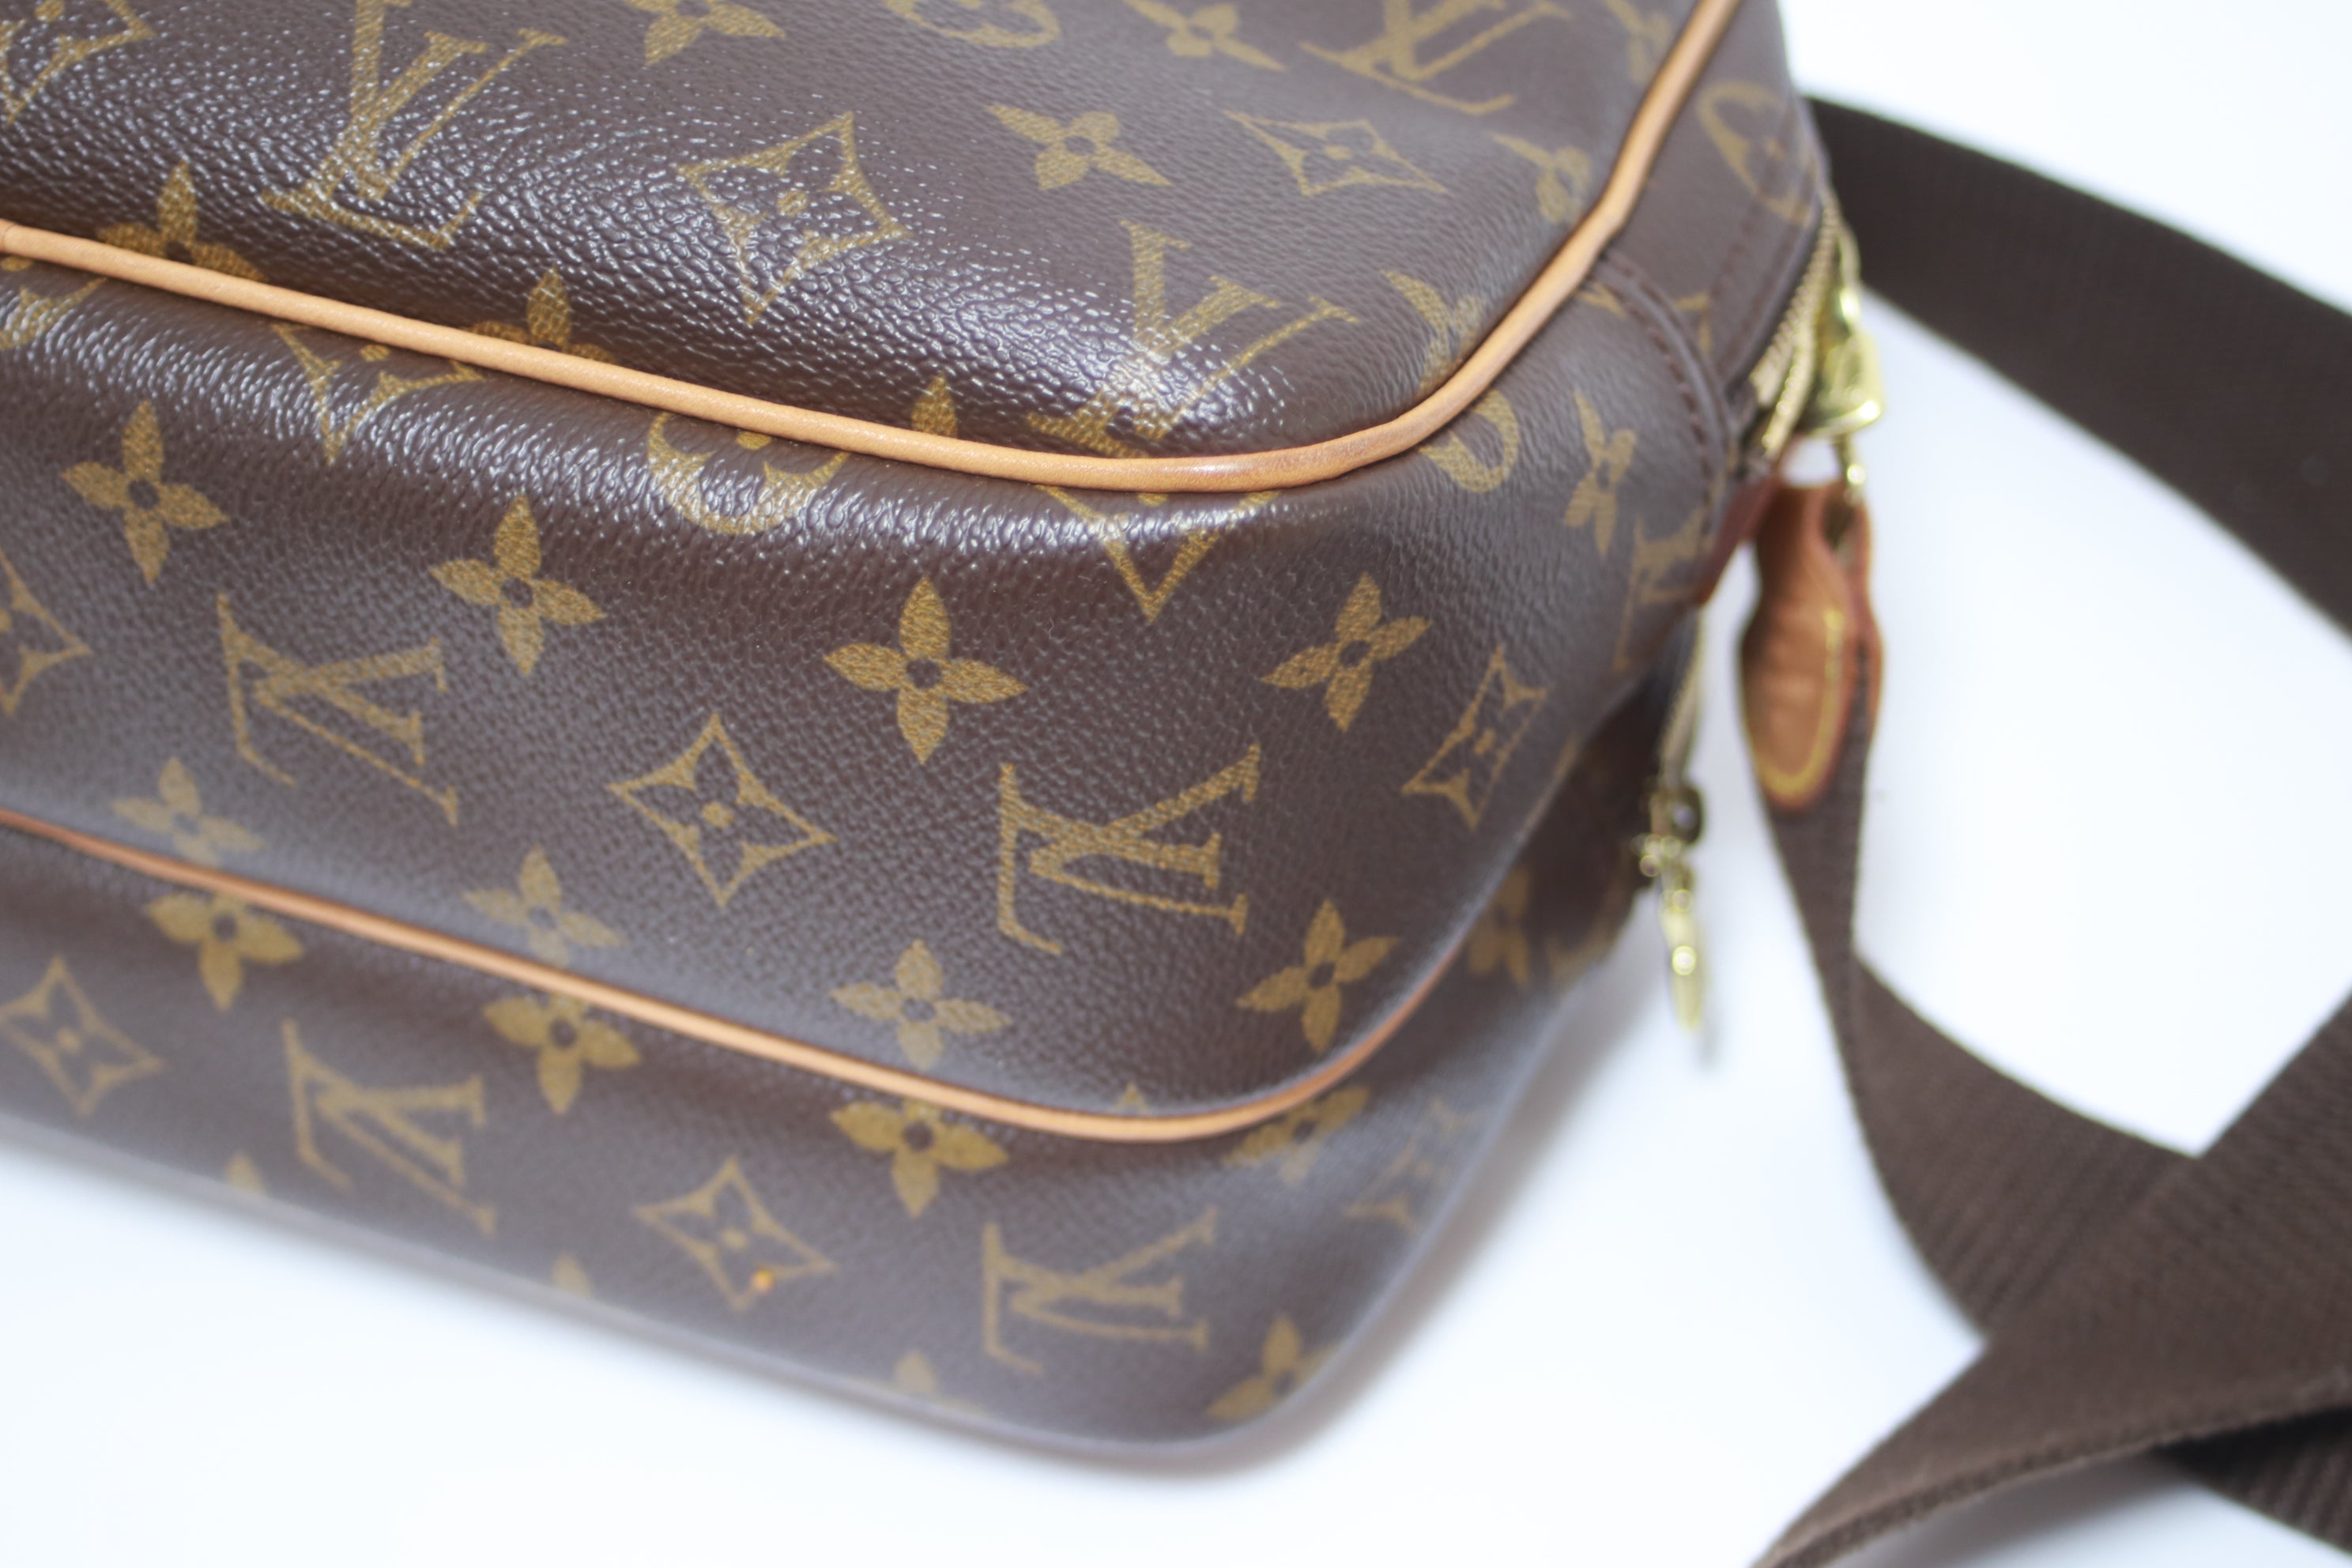 Louis Vuitton Reporter PM Messenger Bag Used (8328)